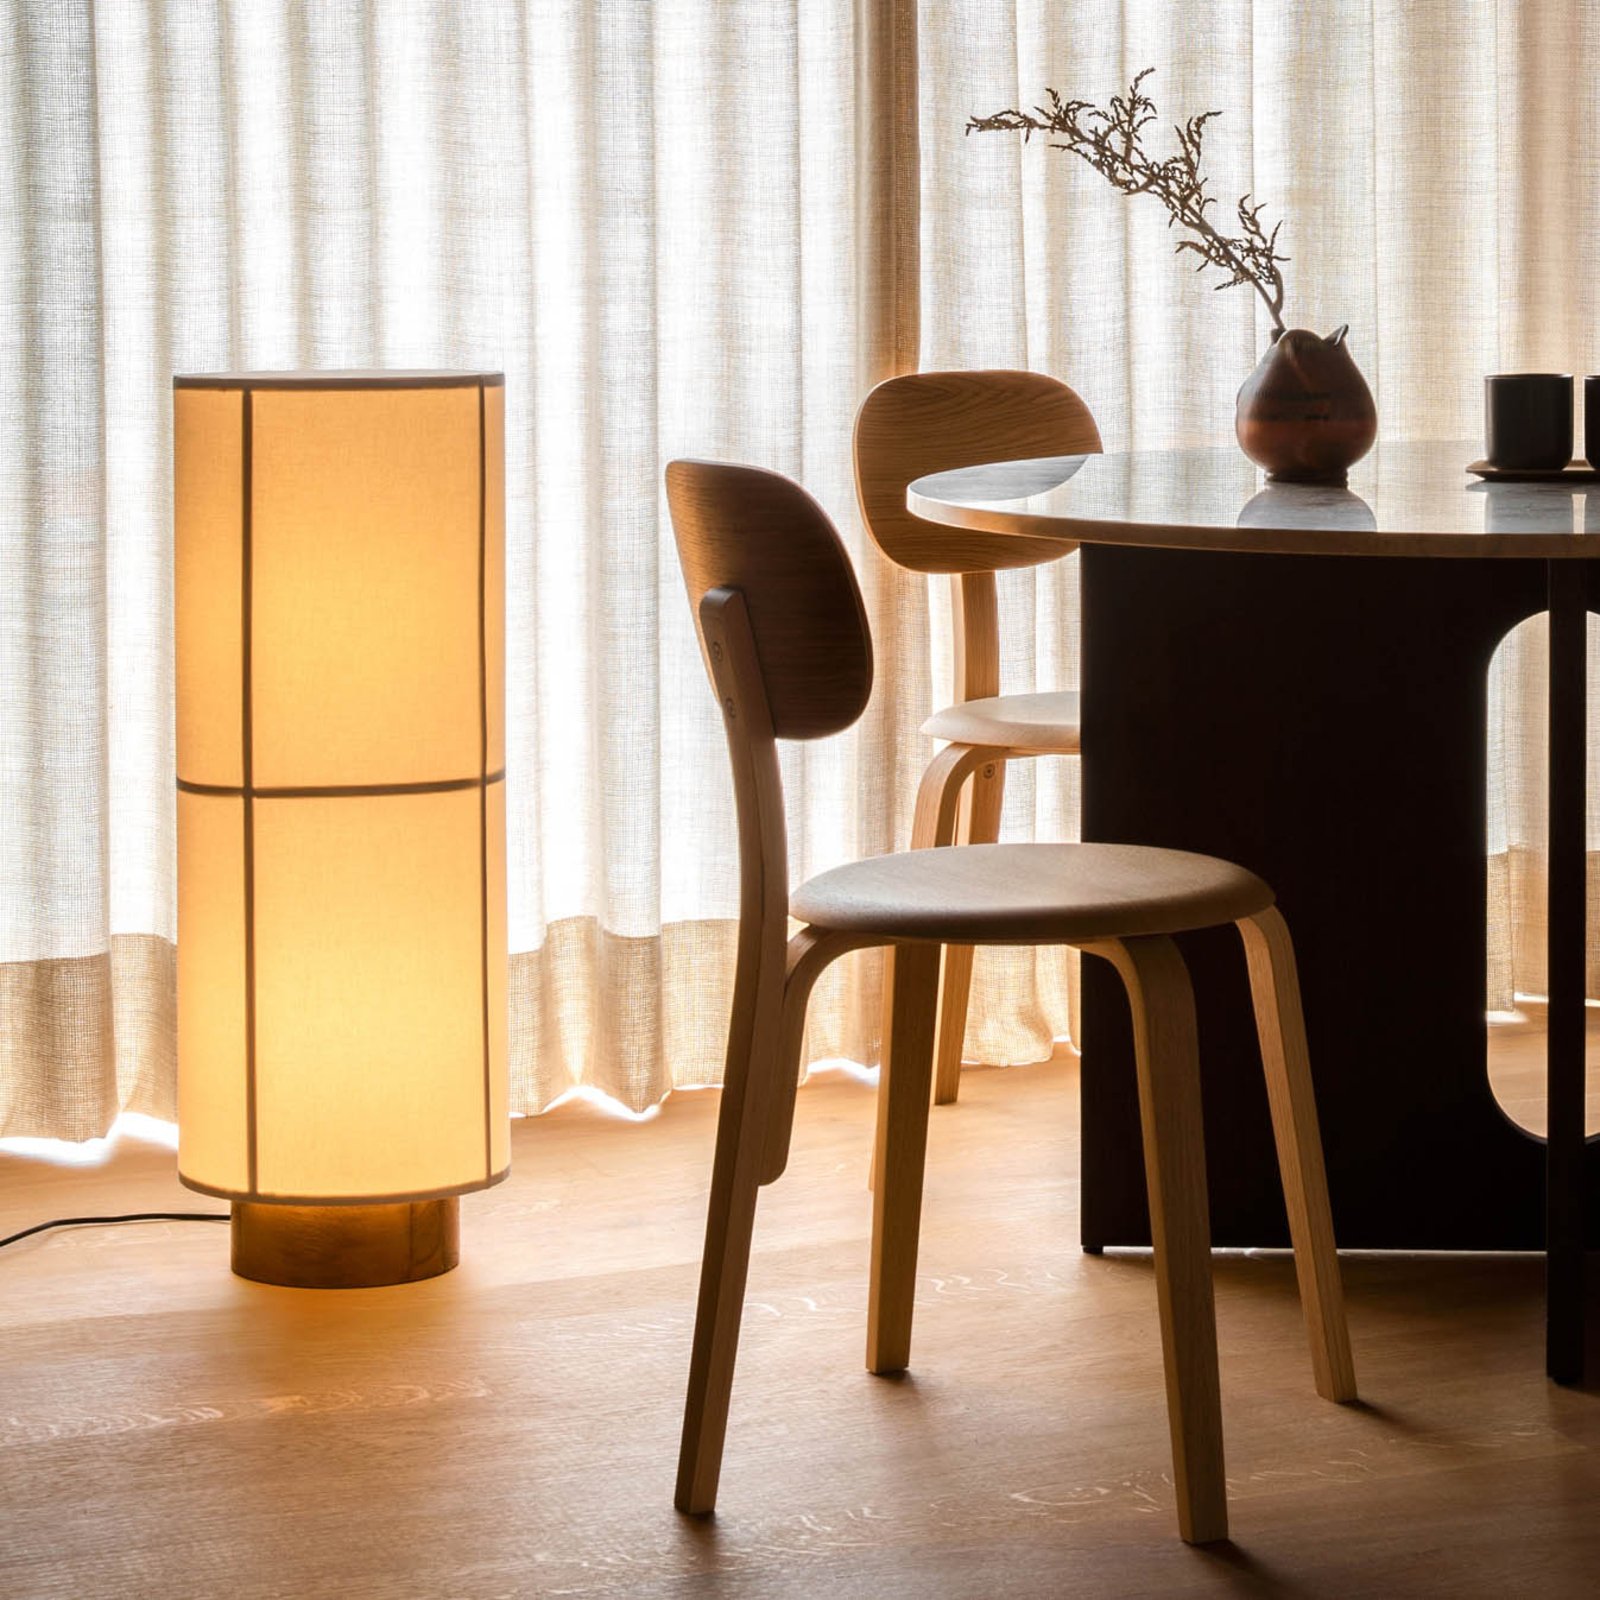 Audo Hashira floor lamp with a dimmer, natural